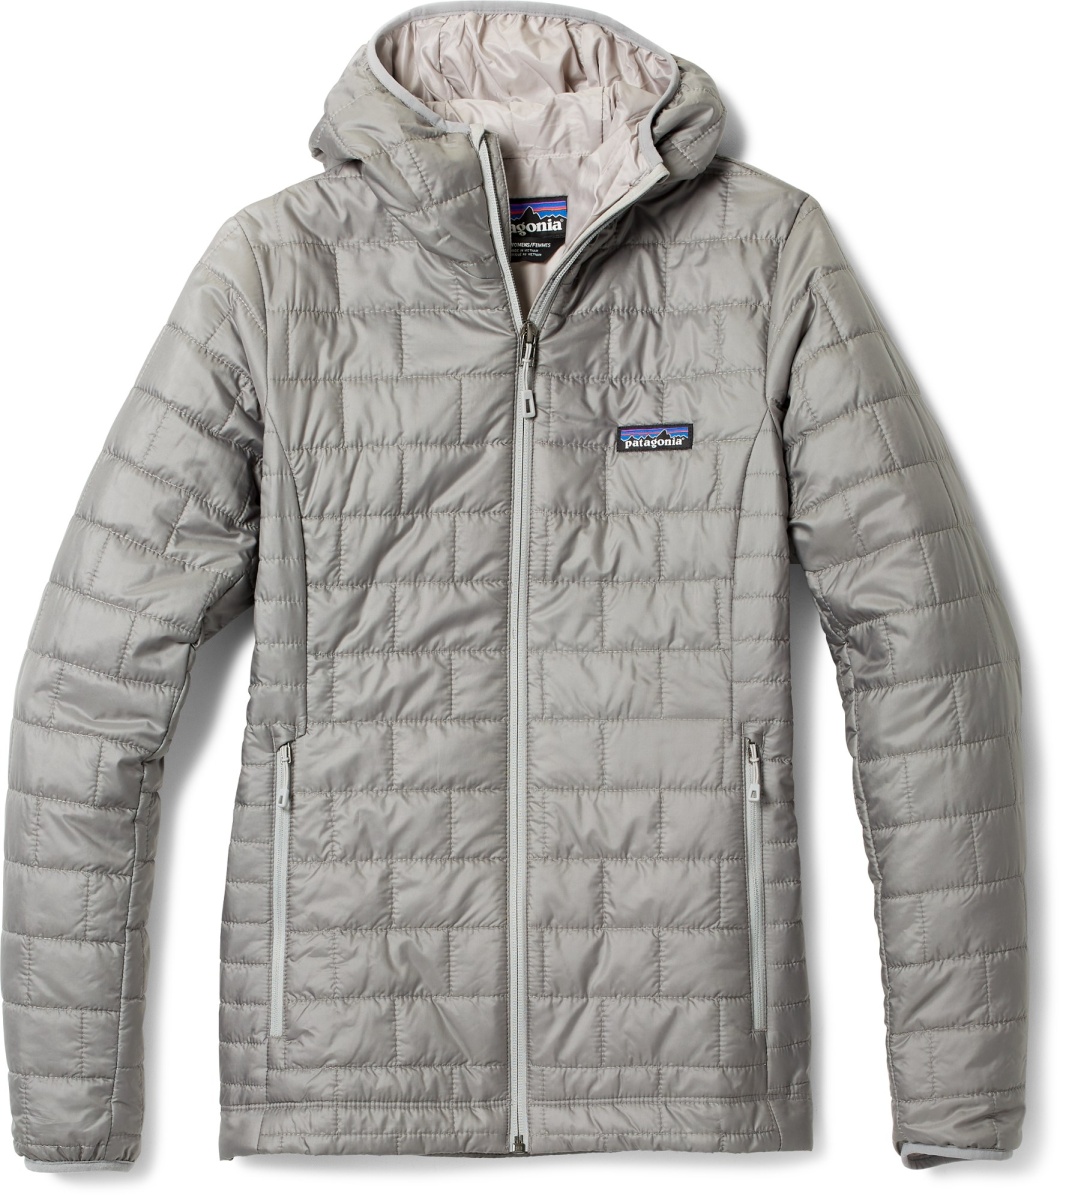 Patagonia Nano Puff Jacket - Women's, Synthetic Insulated